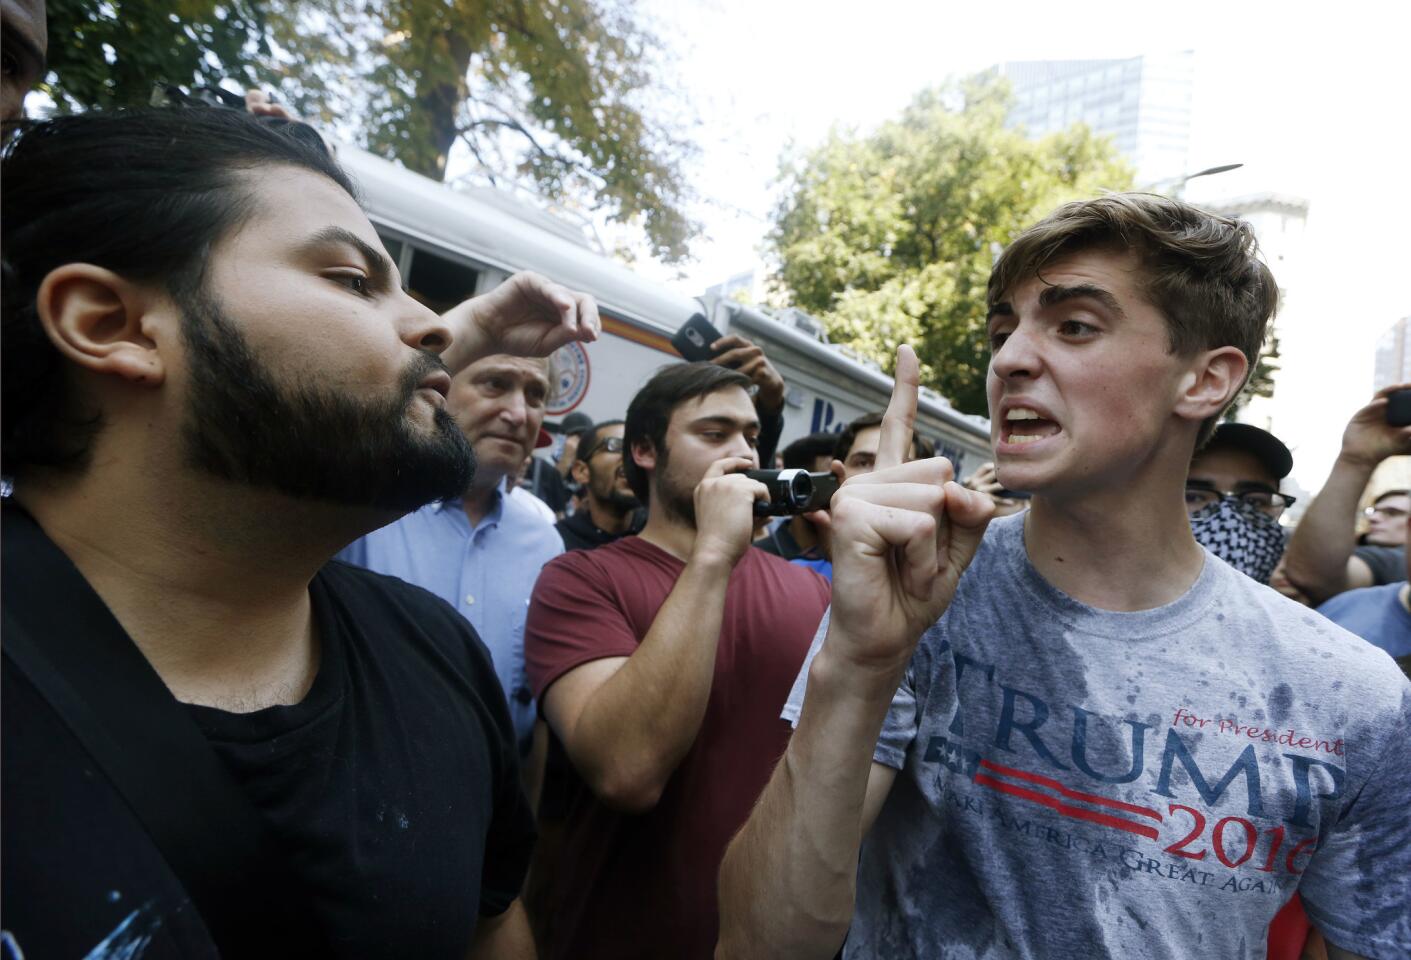 A man wearing a T-shirt bearing the name of President Donald Trump, right, argues with a counter-protester after being hit by a plastic bottle of water near a "free speech" rally staged by conservative activists.